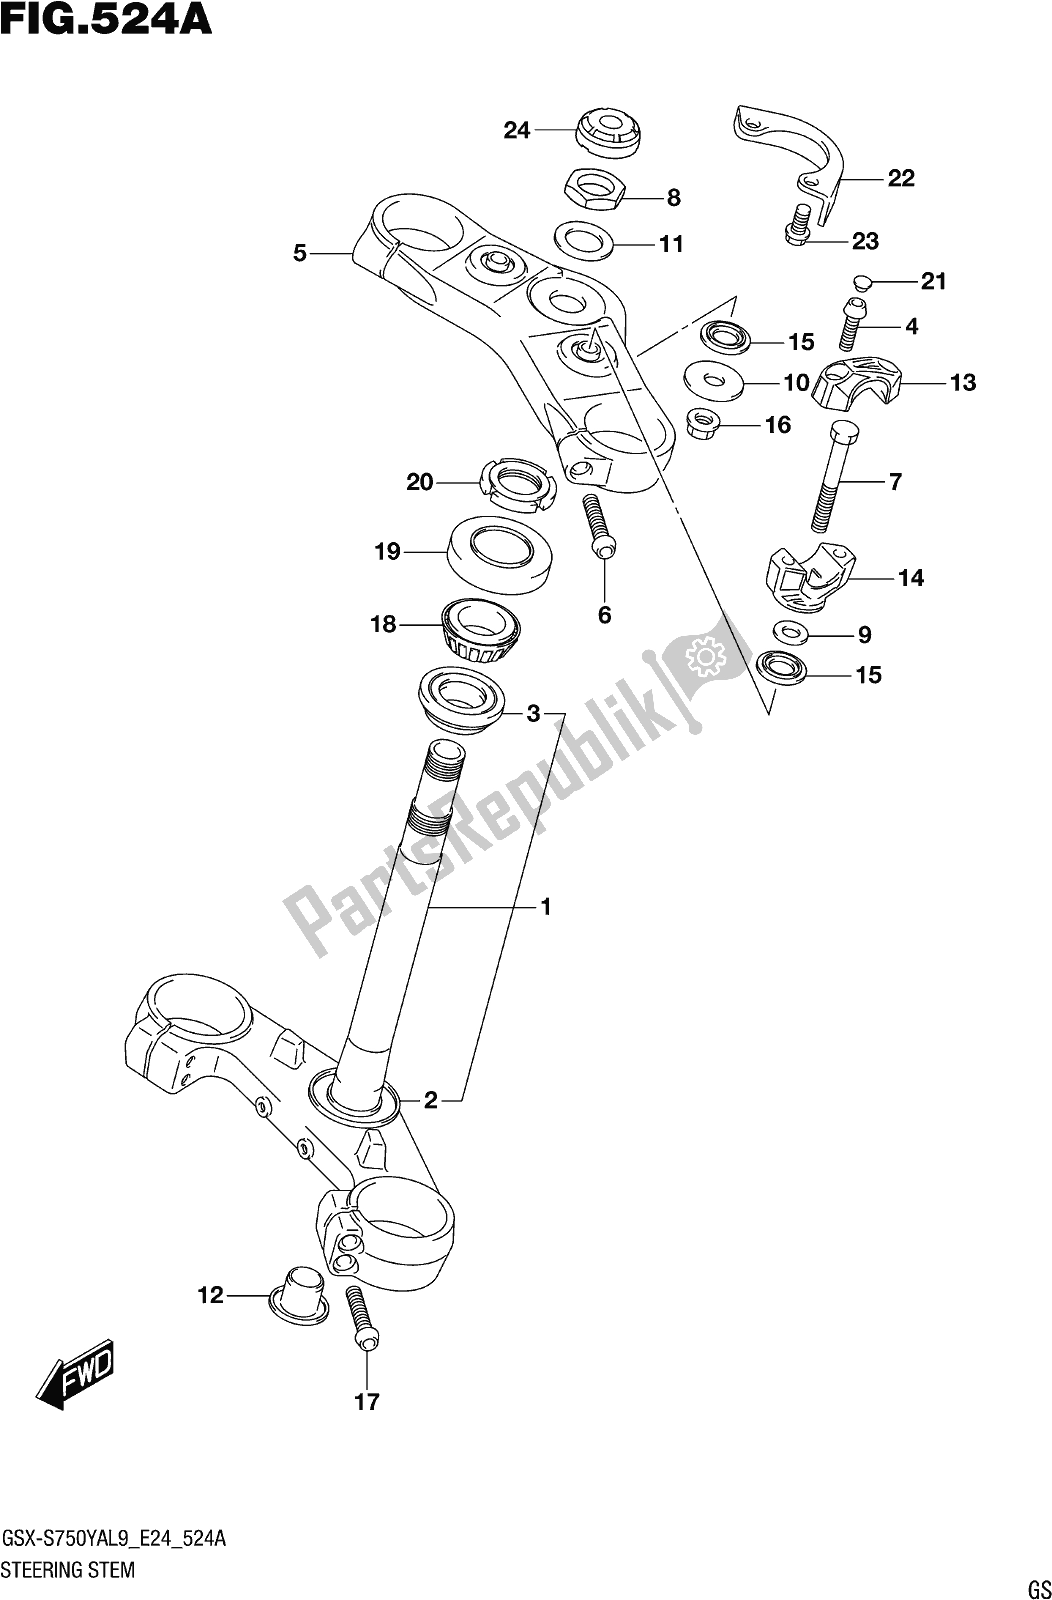 All parts for the Fig. 524a Steering Stem of the Suzuki Gsx-s 750 ZA 2019